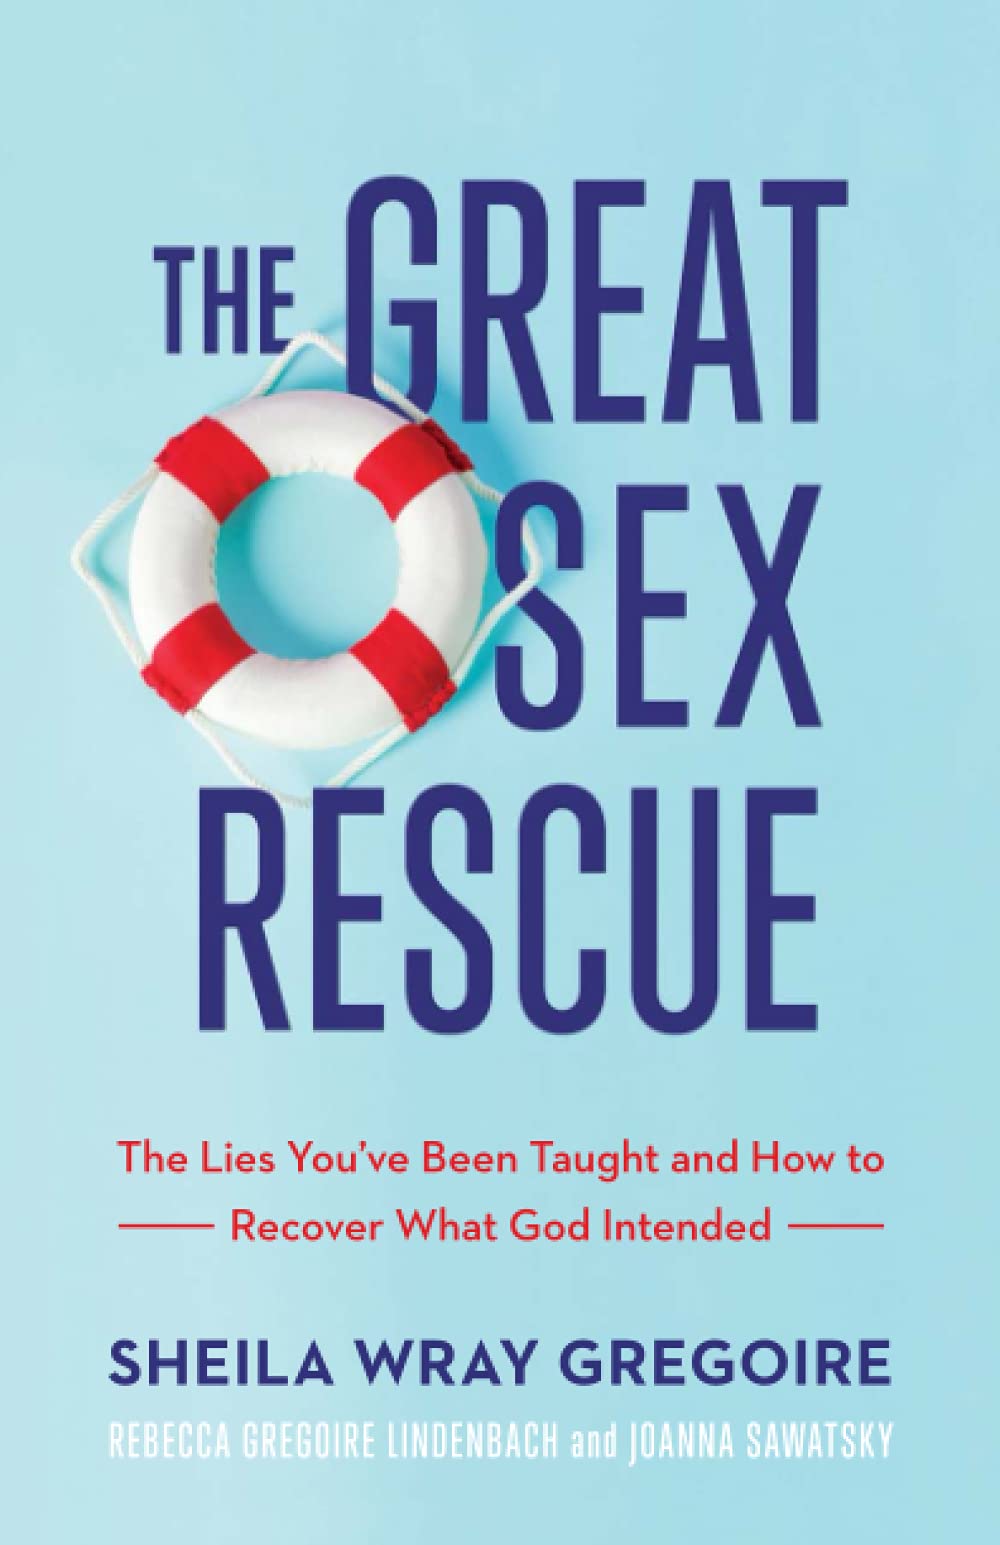 Cover of book called The Great sex rescue